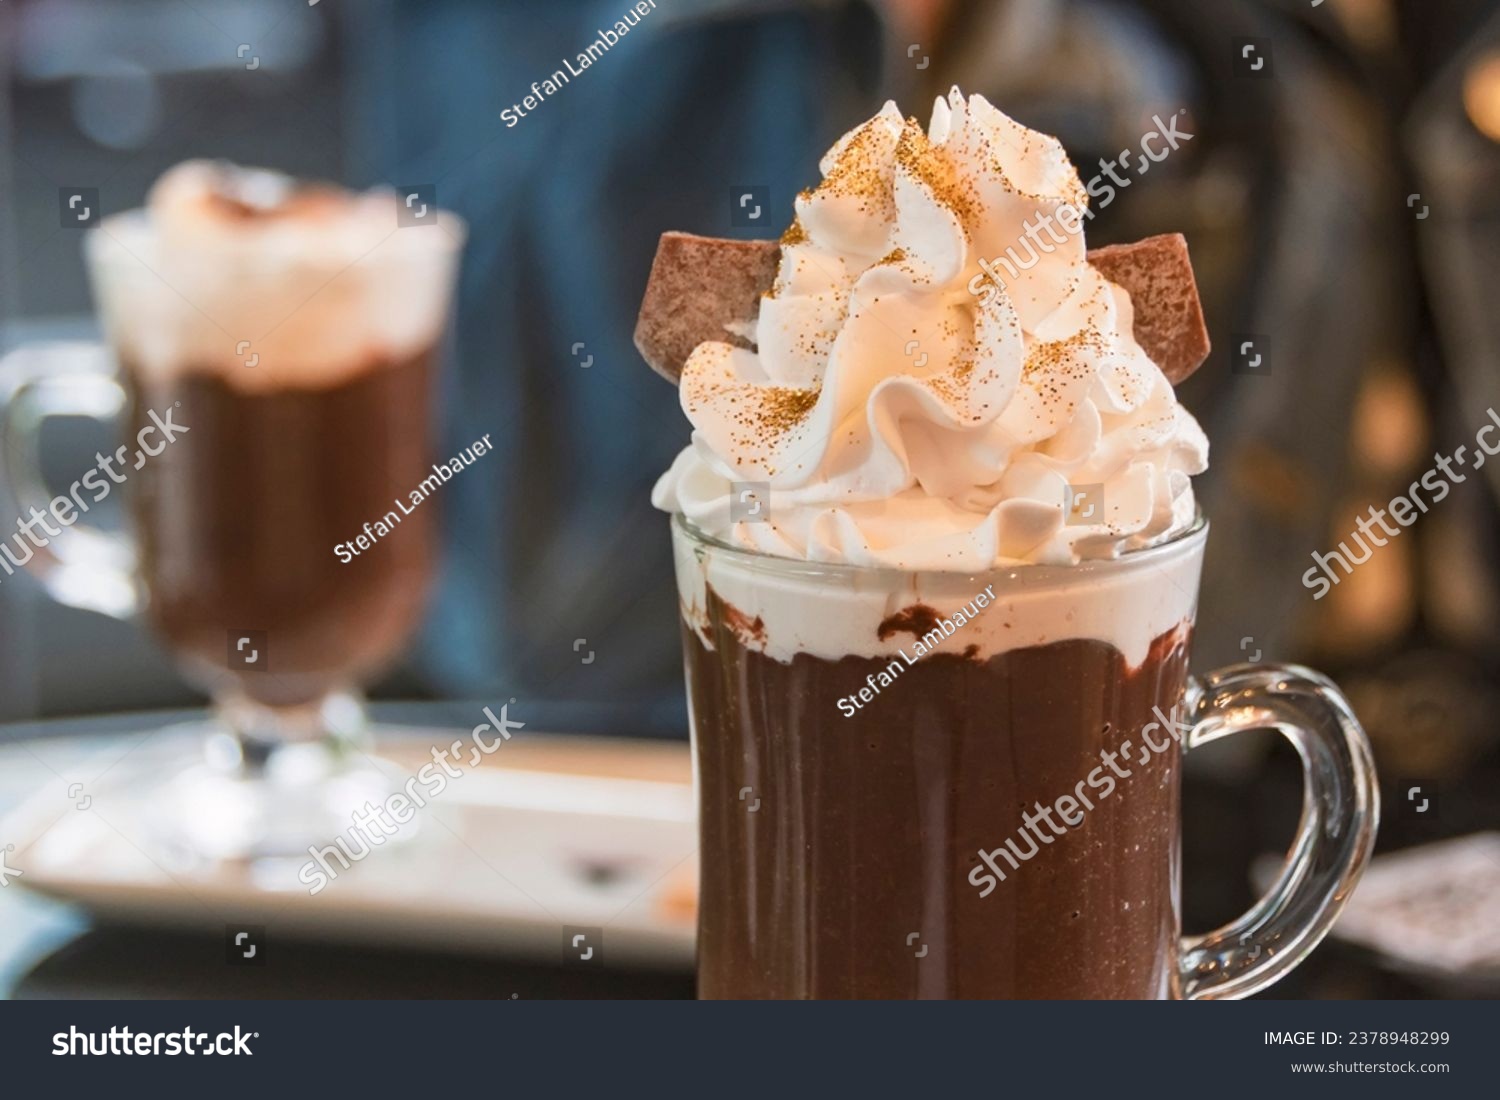 Hot chocolate with whipped cream and golden edible glitter in a transparent cup. Blurred background. #2378948299